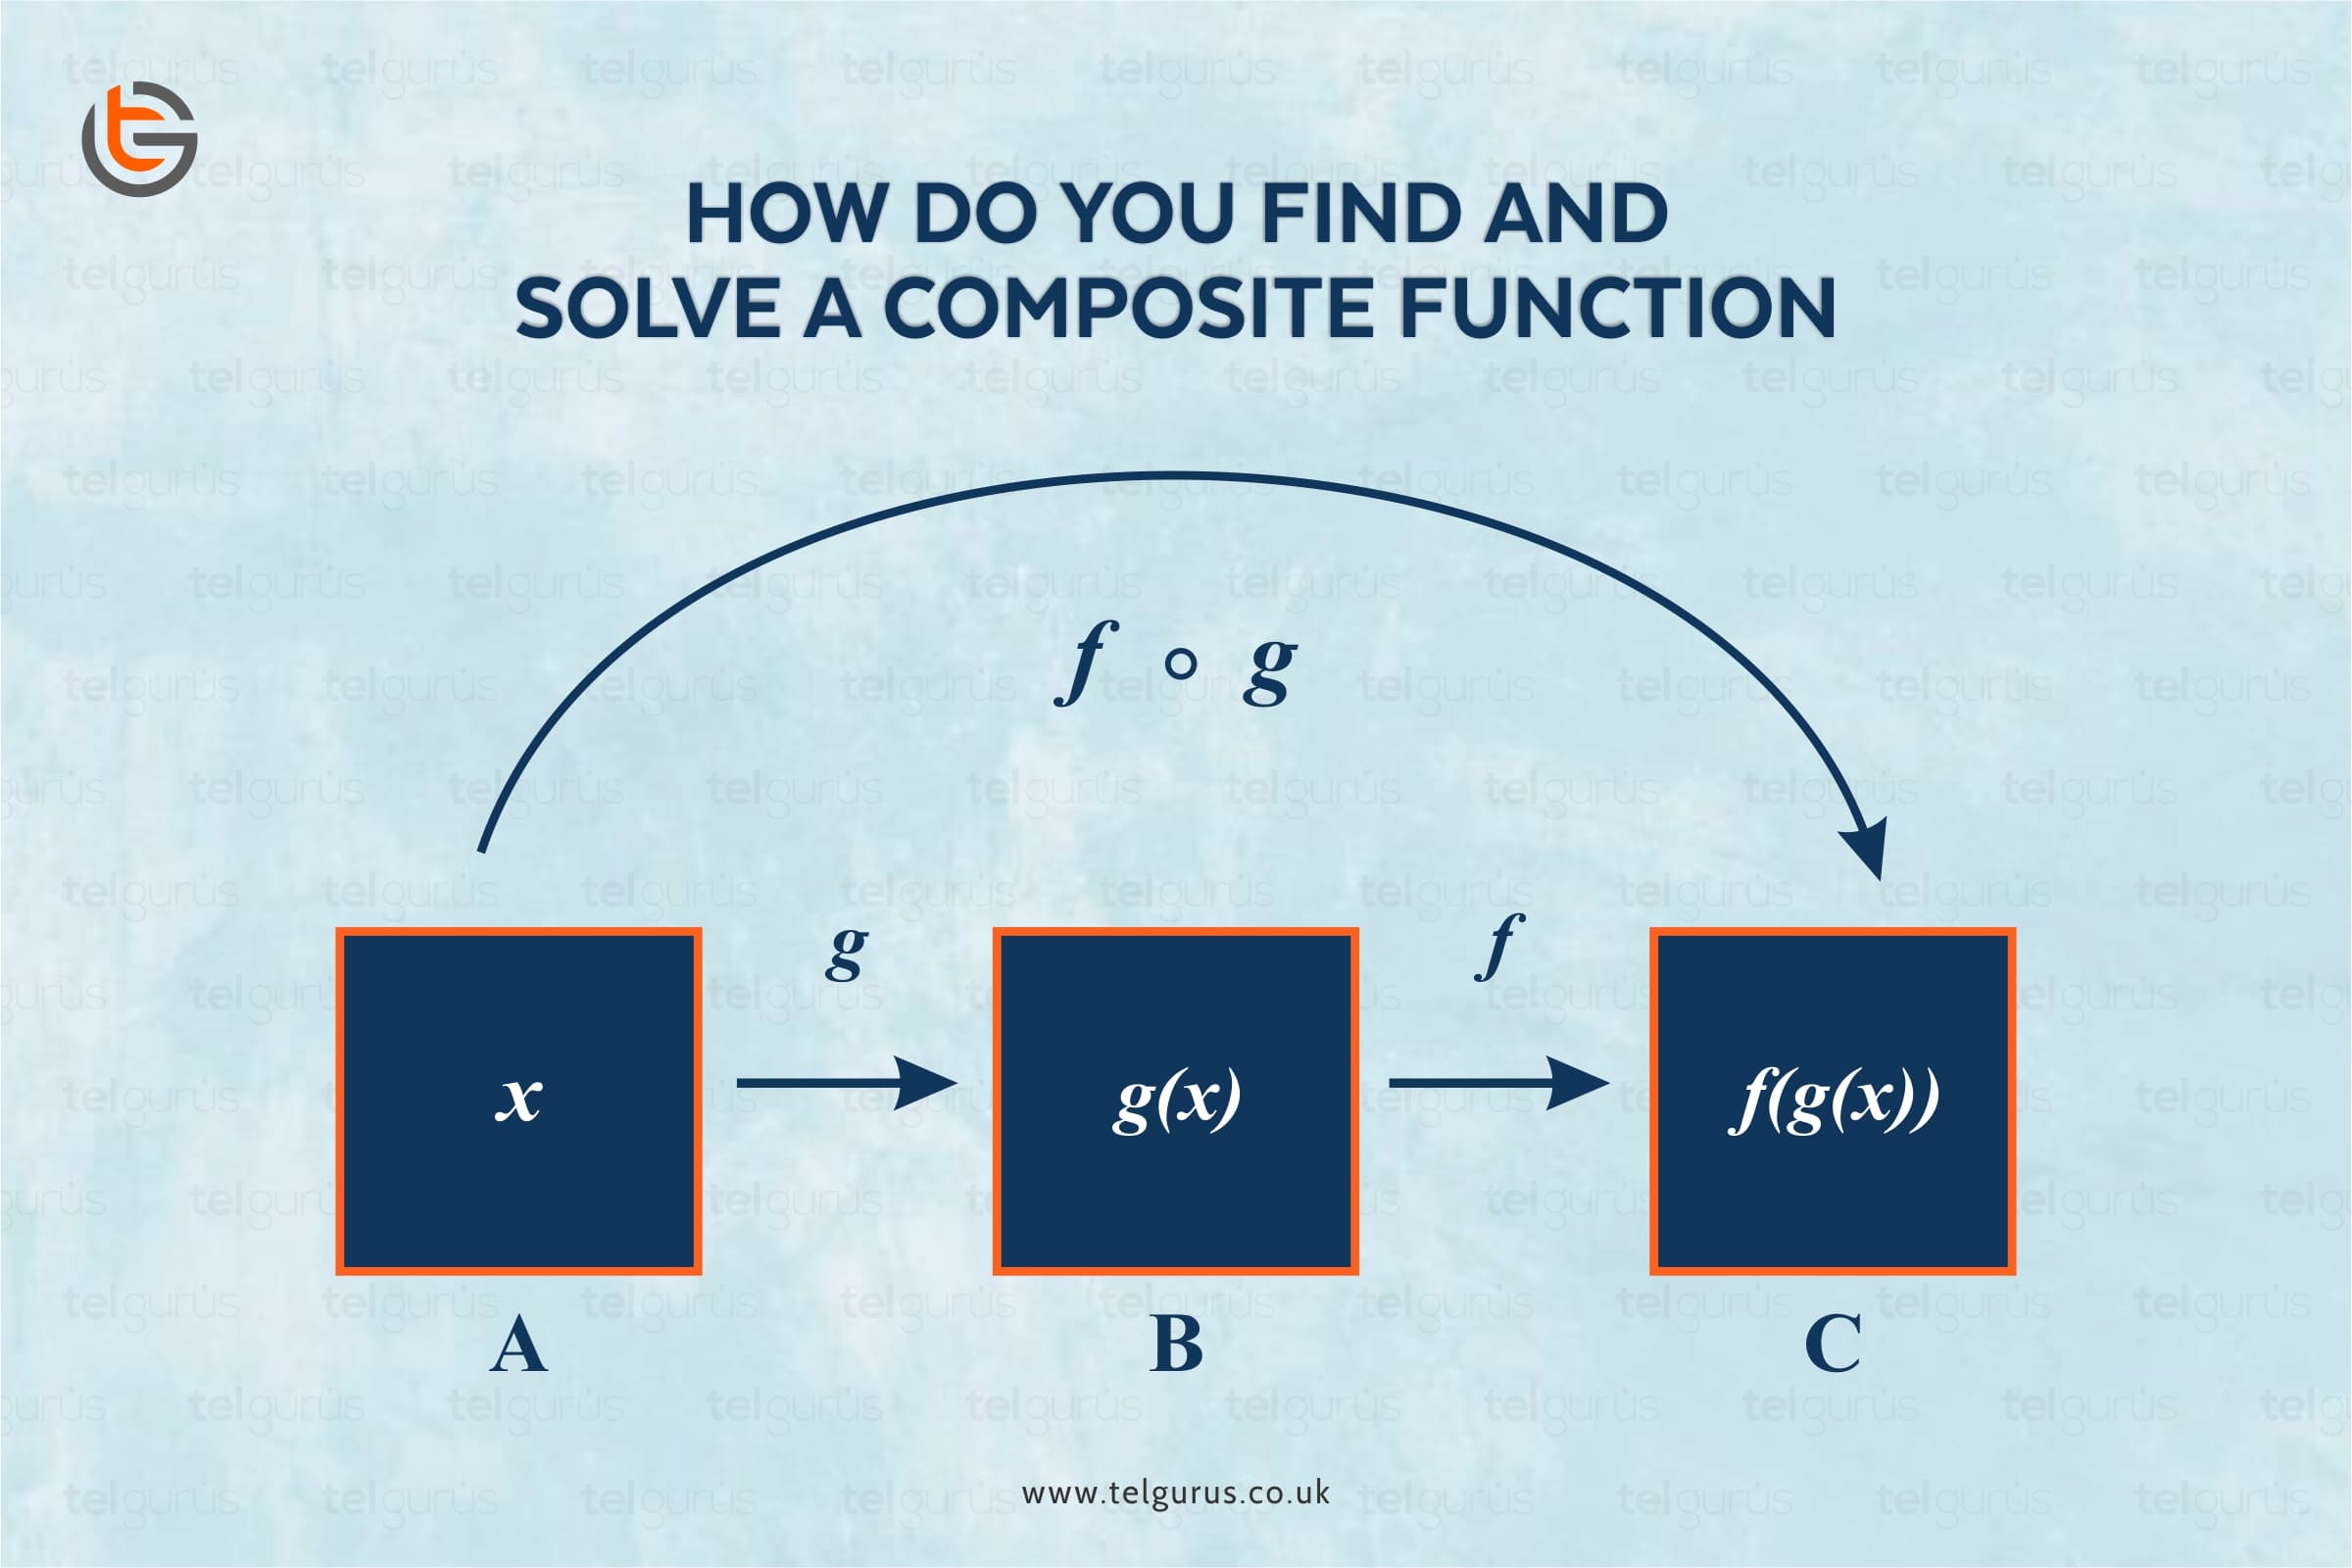 How do you find and solve a composite function?